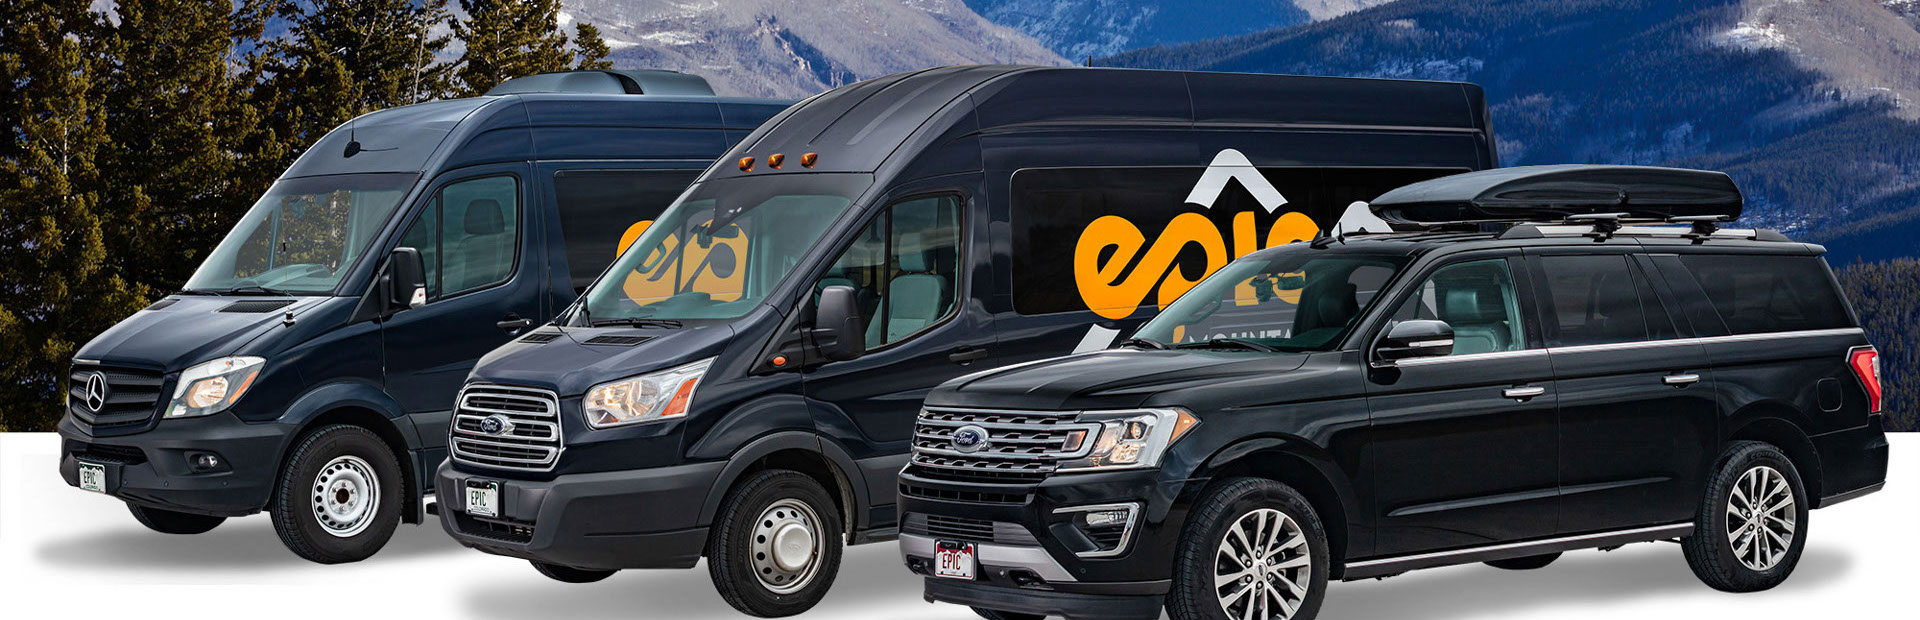 Three black Epic Mountain Express vehicles with a mountain backdrop behind